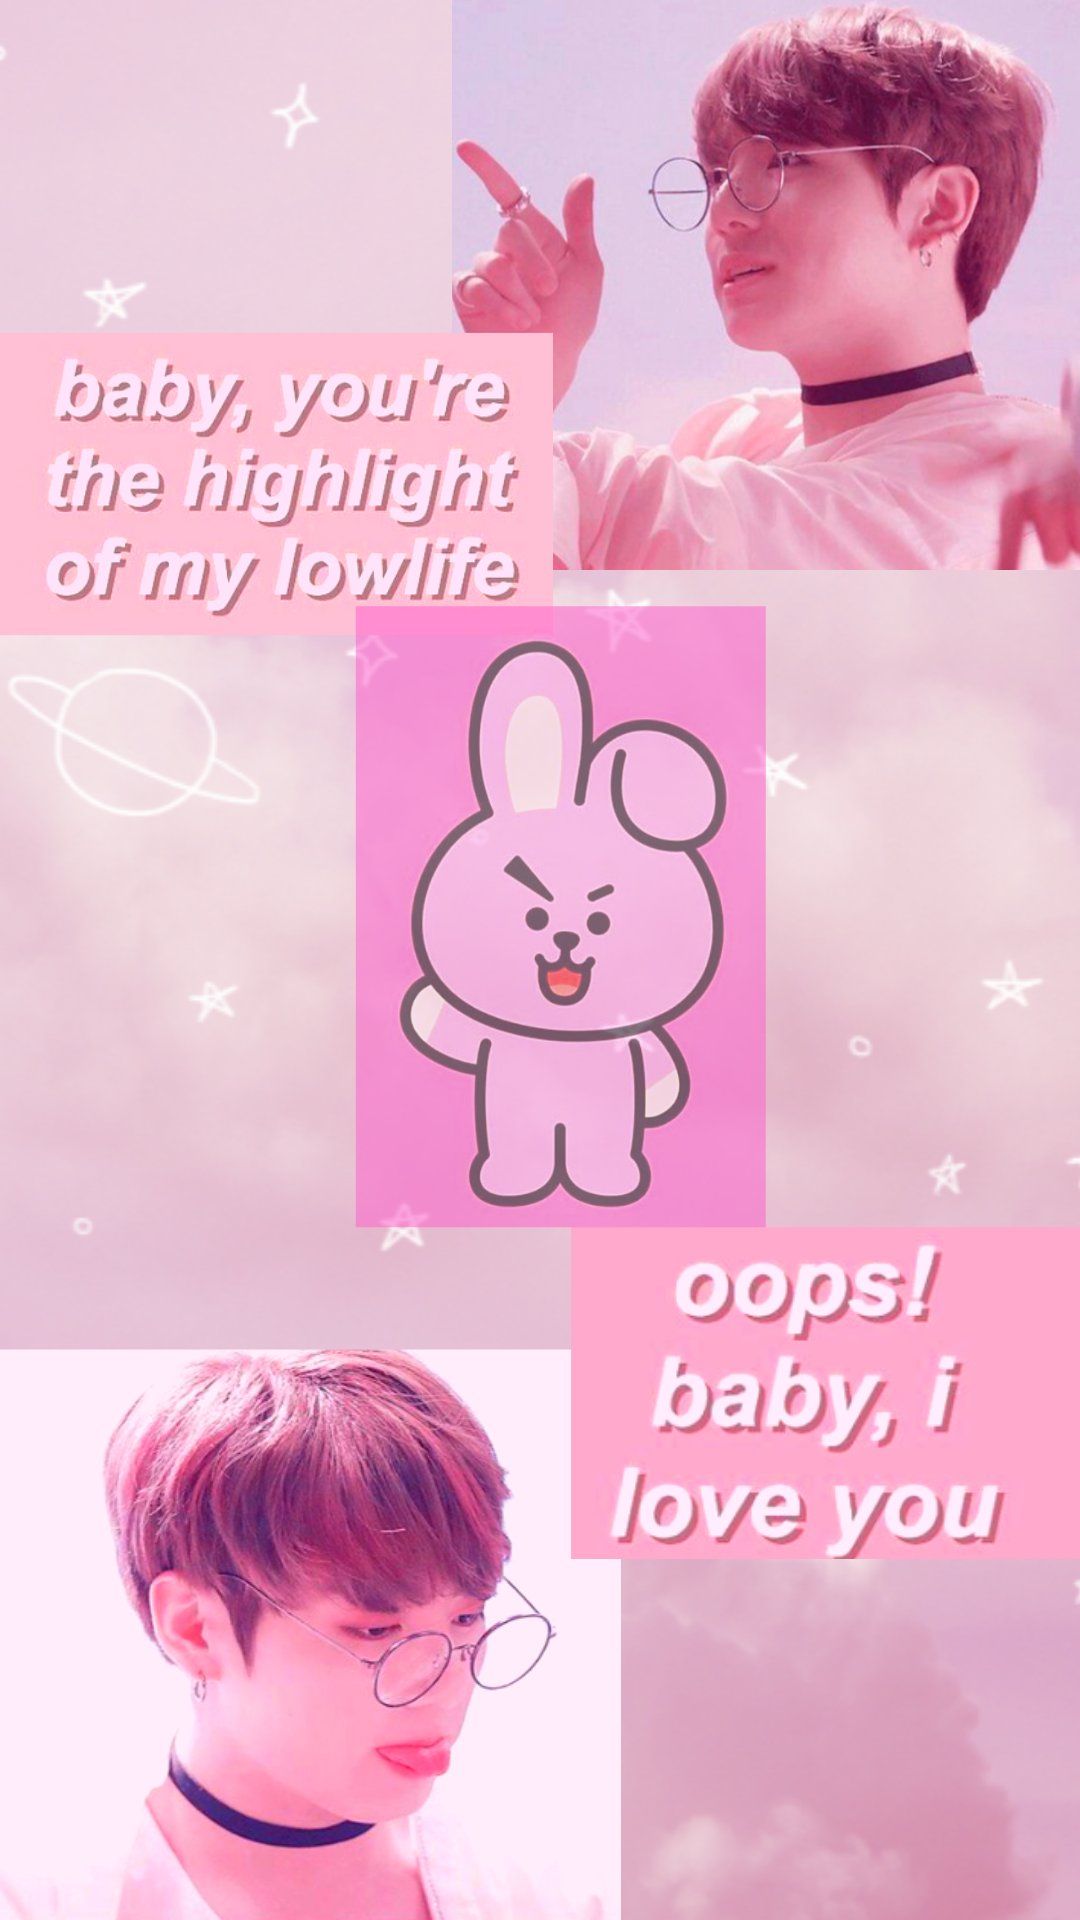 Black_Roses's simple, cute and pink Aesthetic wallpaper. I put his BT21 character in it because the colour reminds me of Cooky